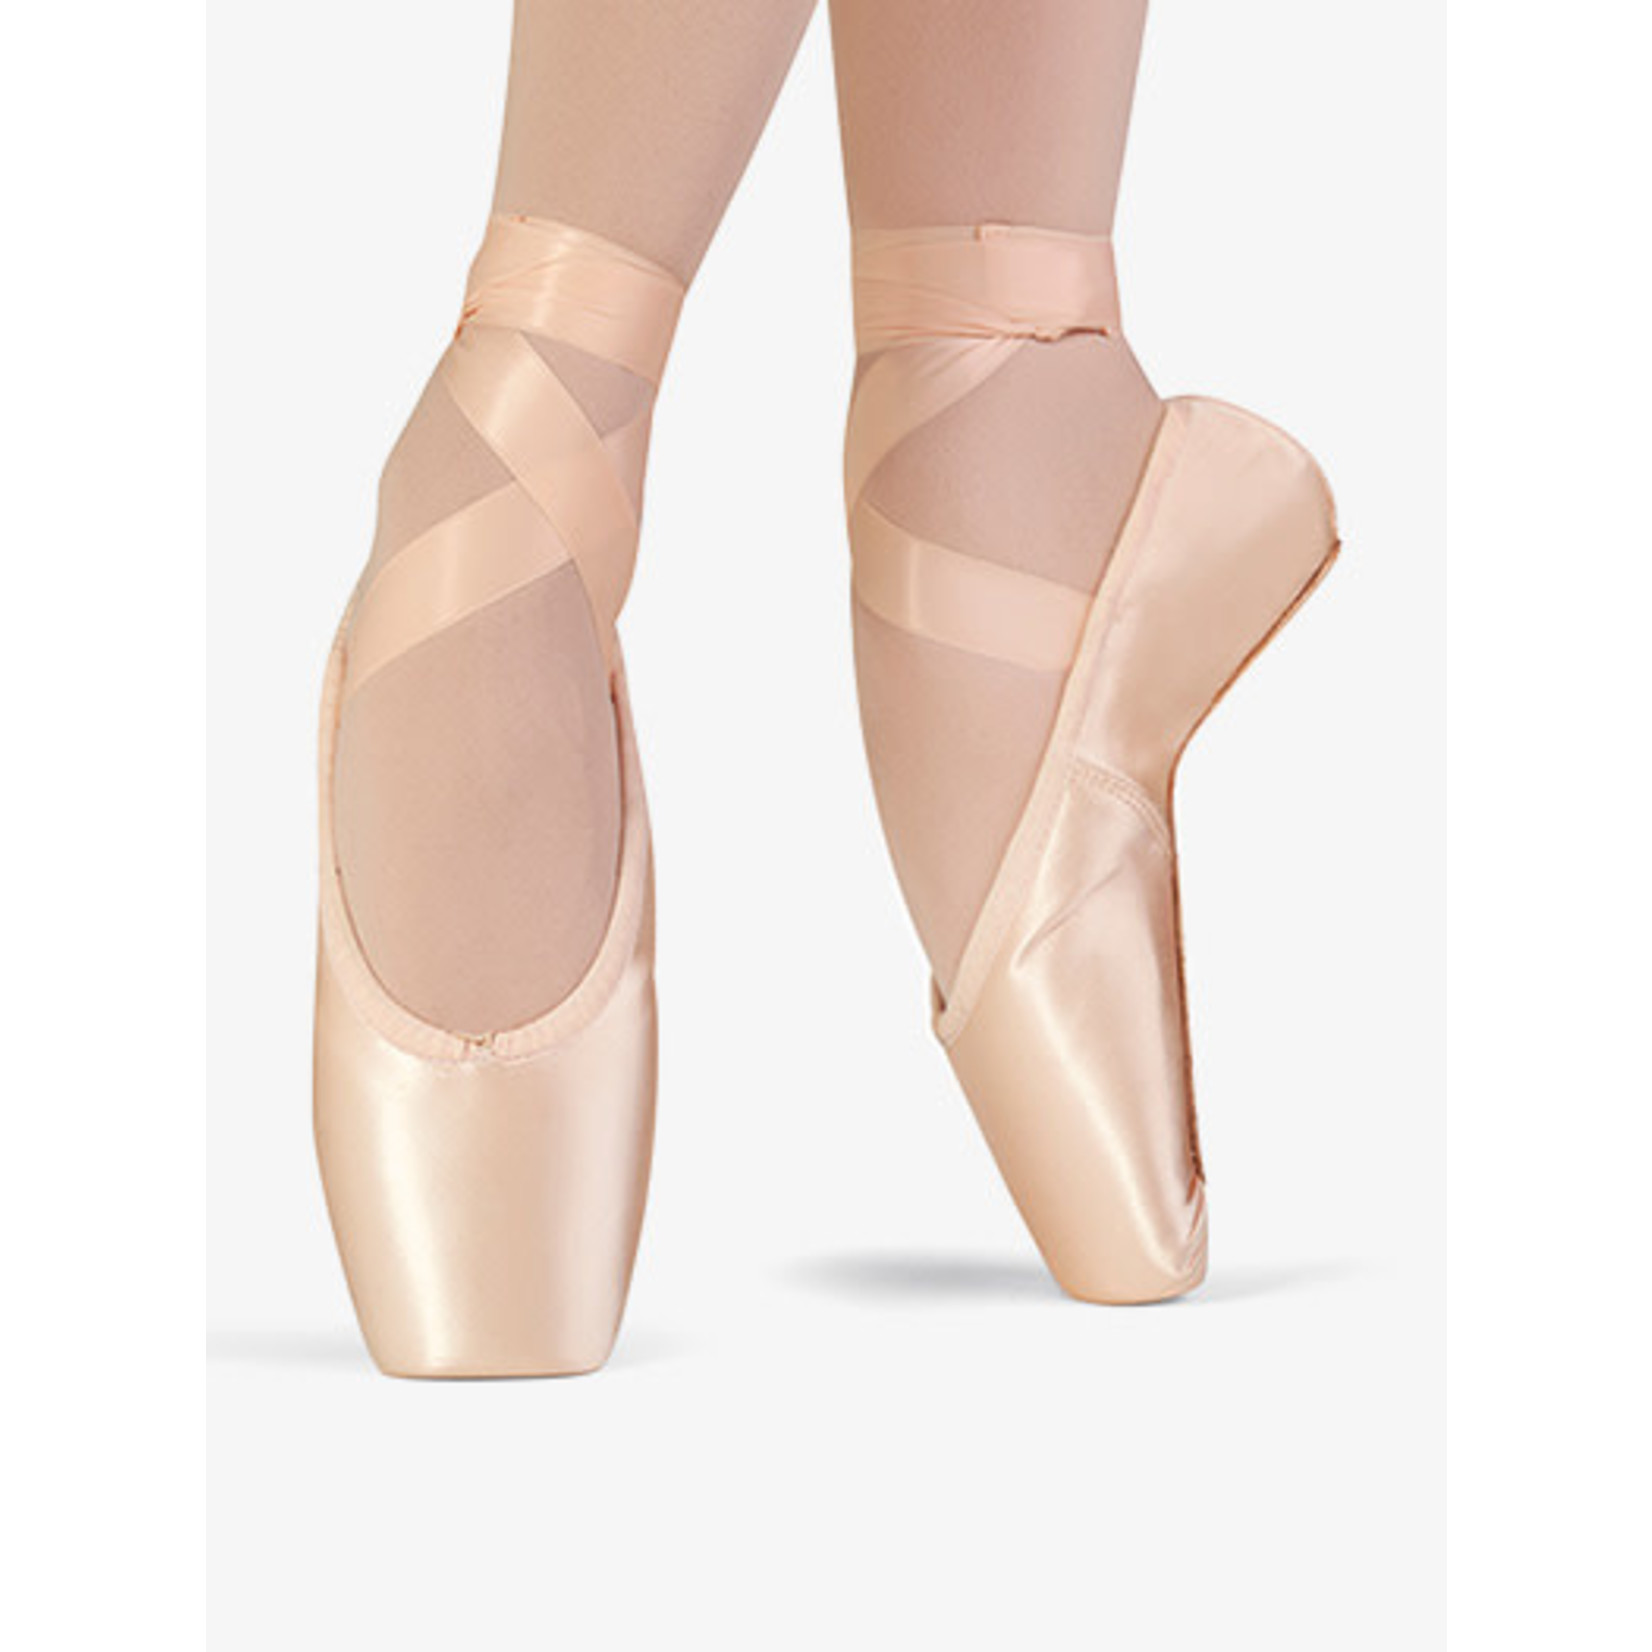 Bloch Synthesis Pointe Shoe